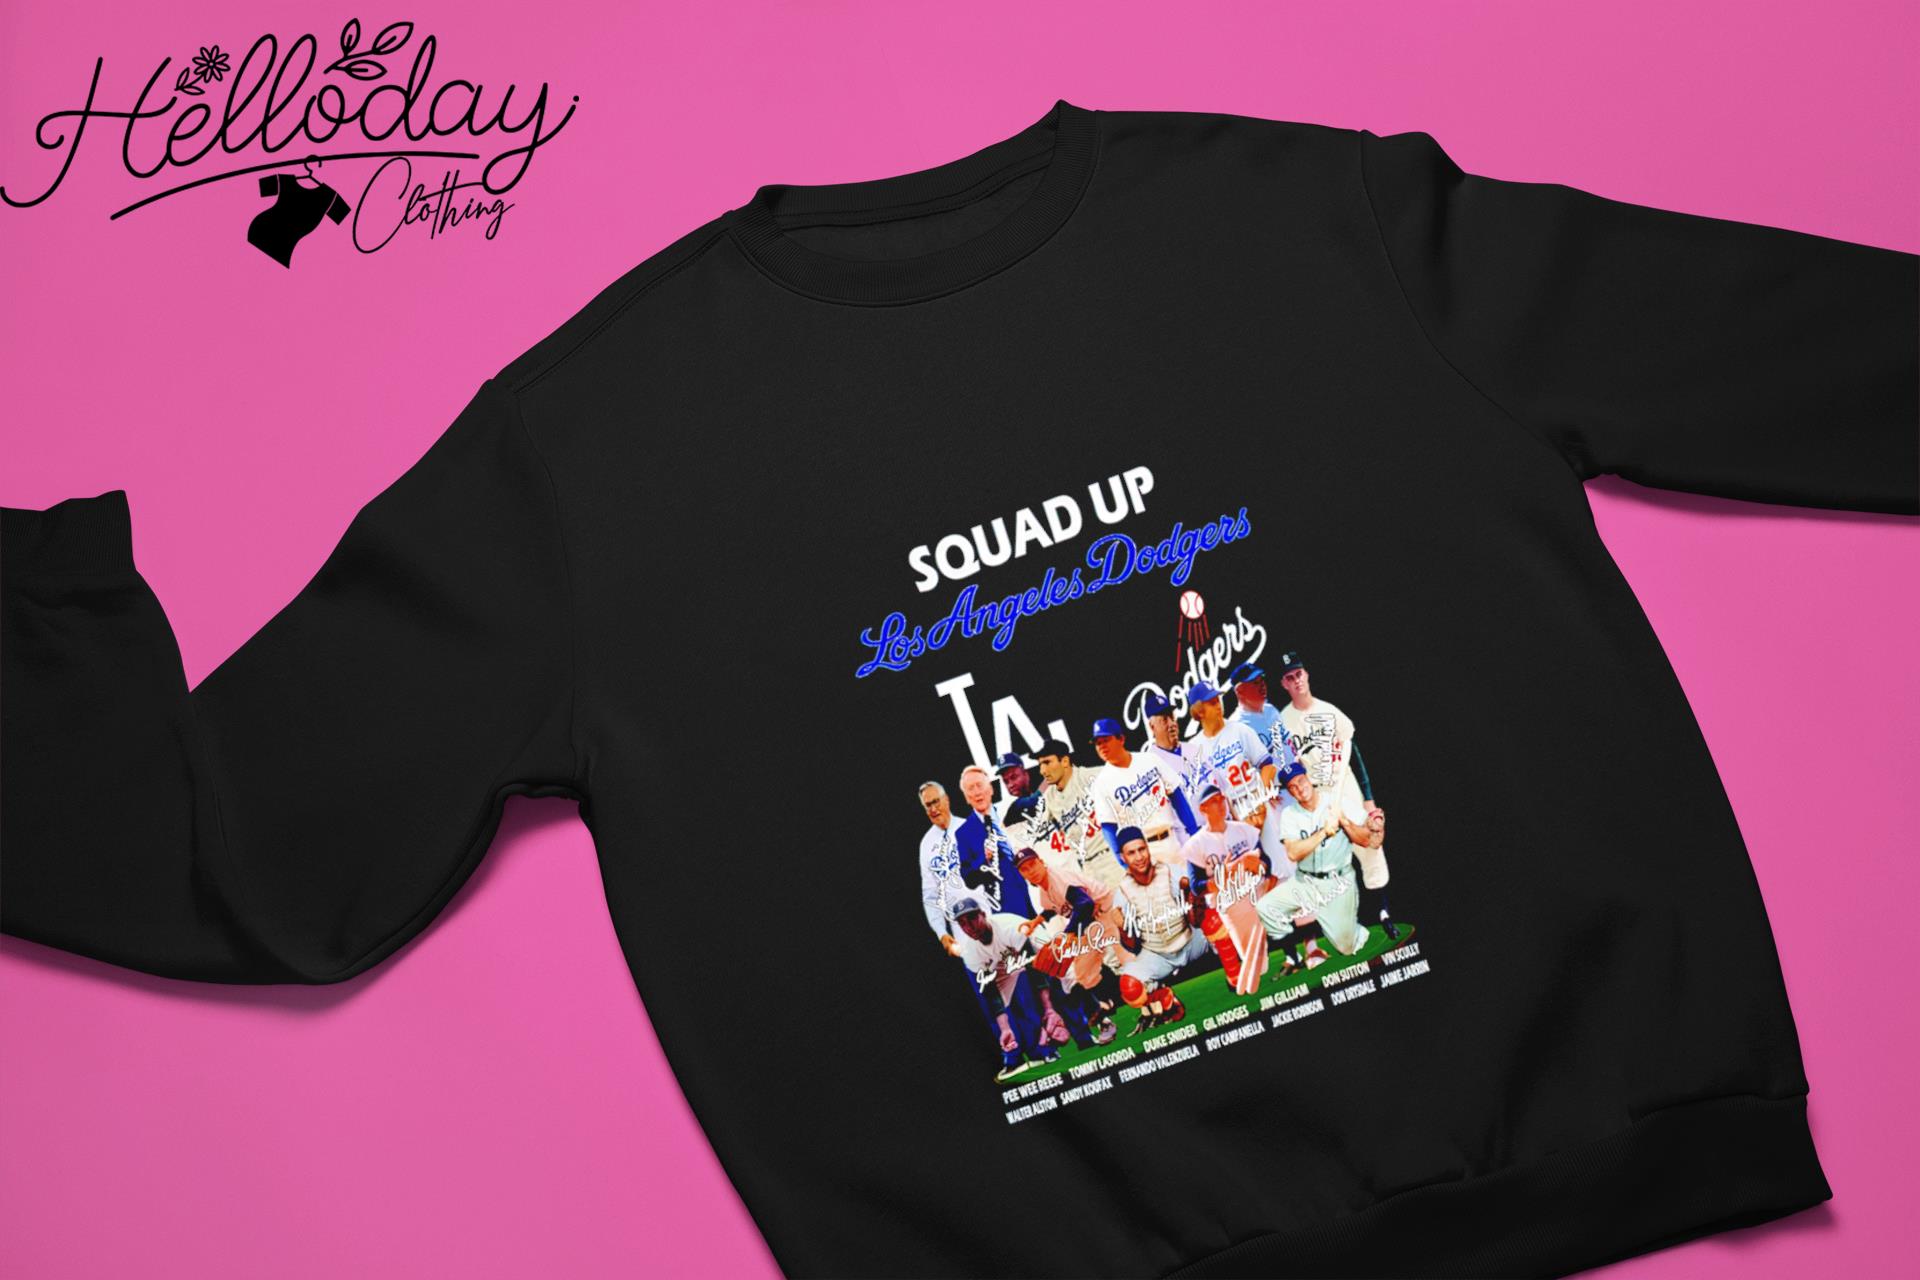 Squad Up Los Angeles Dodgers Signature shirt, hoodie, sweater